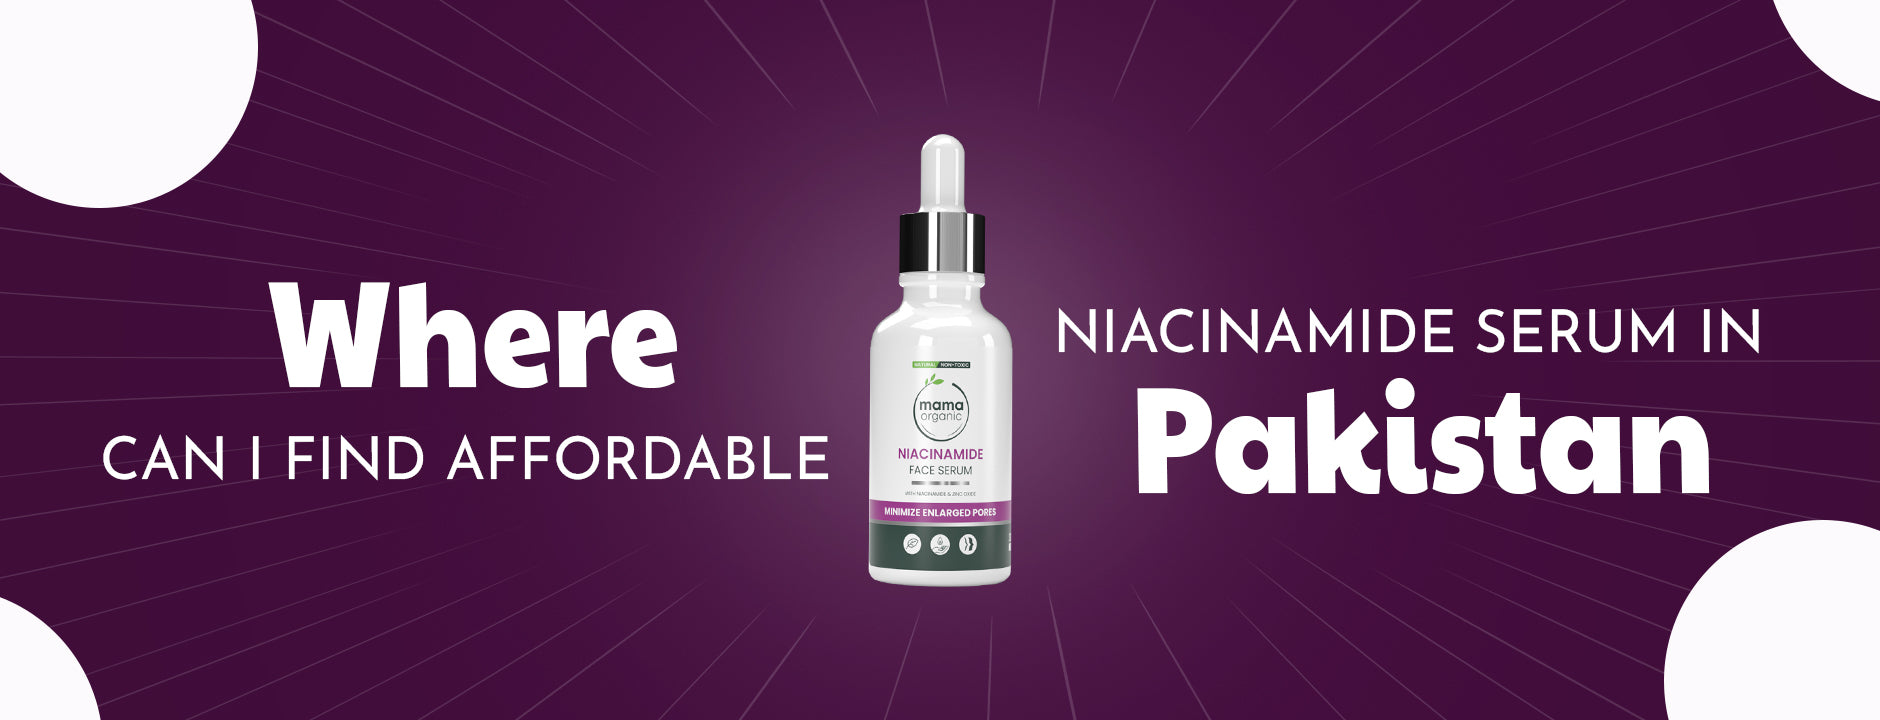 Where to Find Affordable Niacinamide Serum in Pakistan?